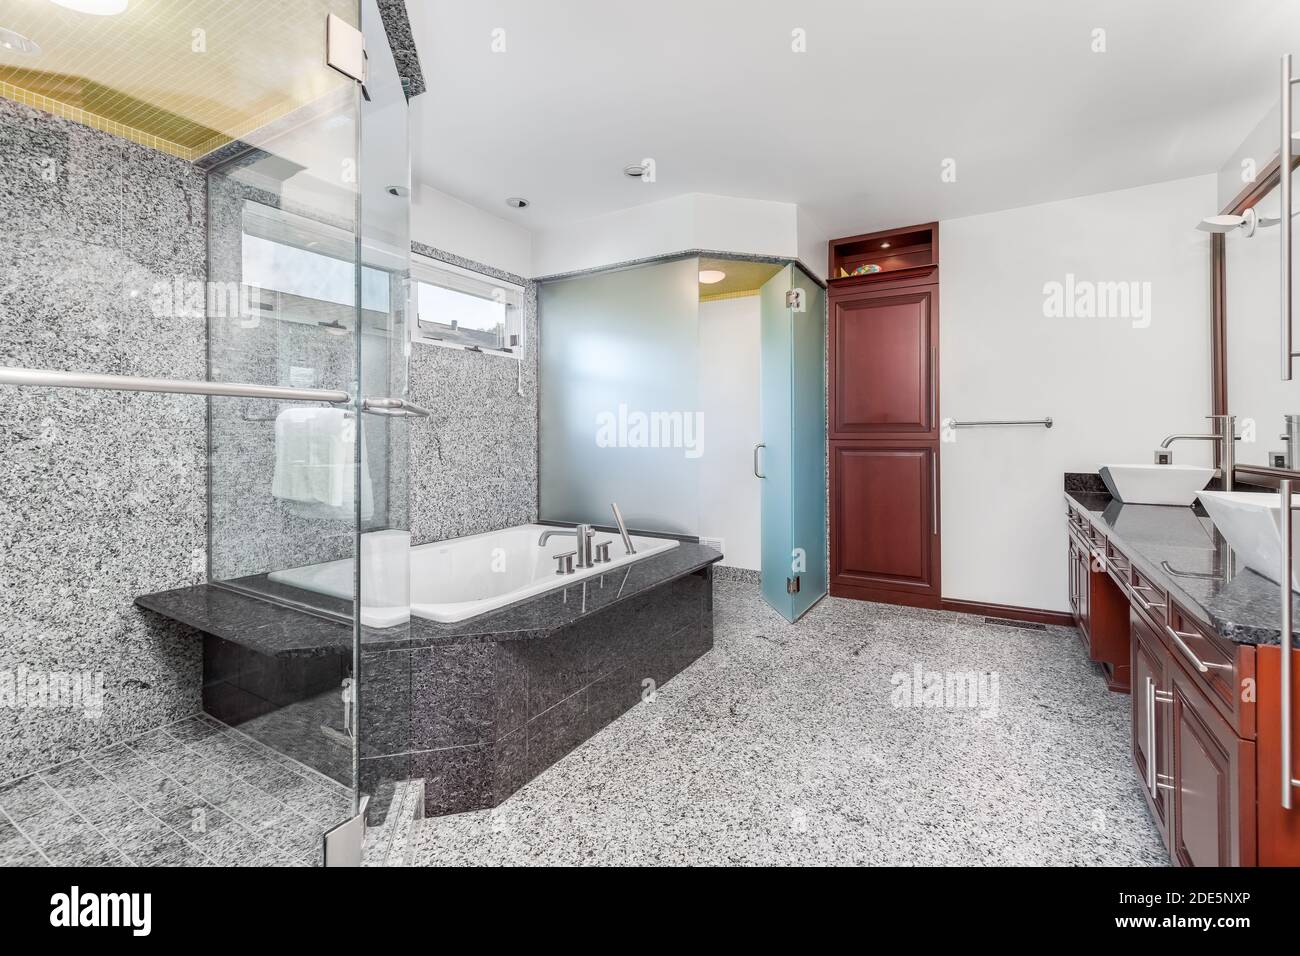 A large, modern bathroom with grey and white marble tiles on the floor and wall with a glass shower, jacuzzi tub and wood cabinets. Stock Photo